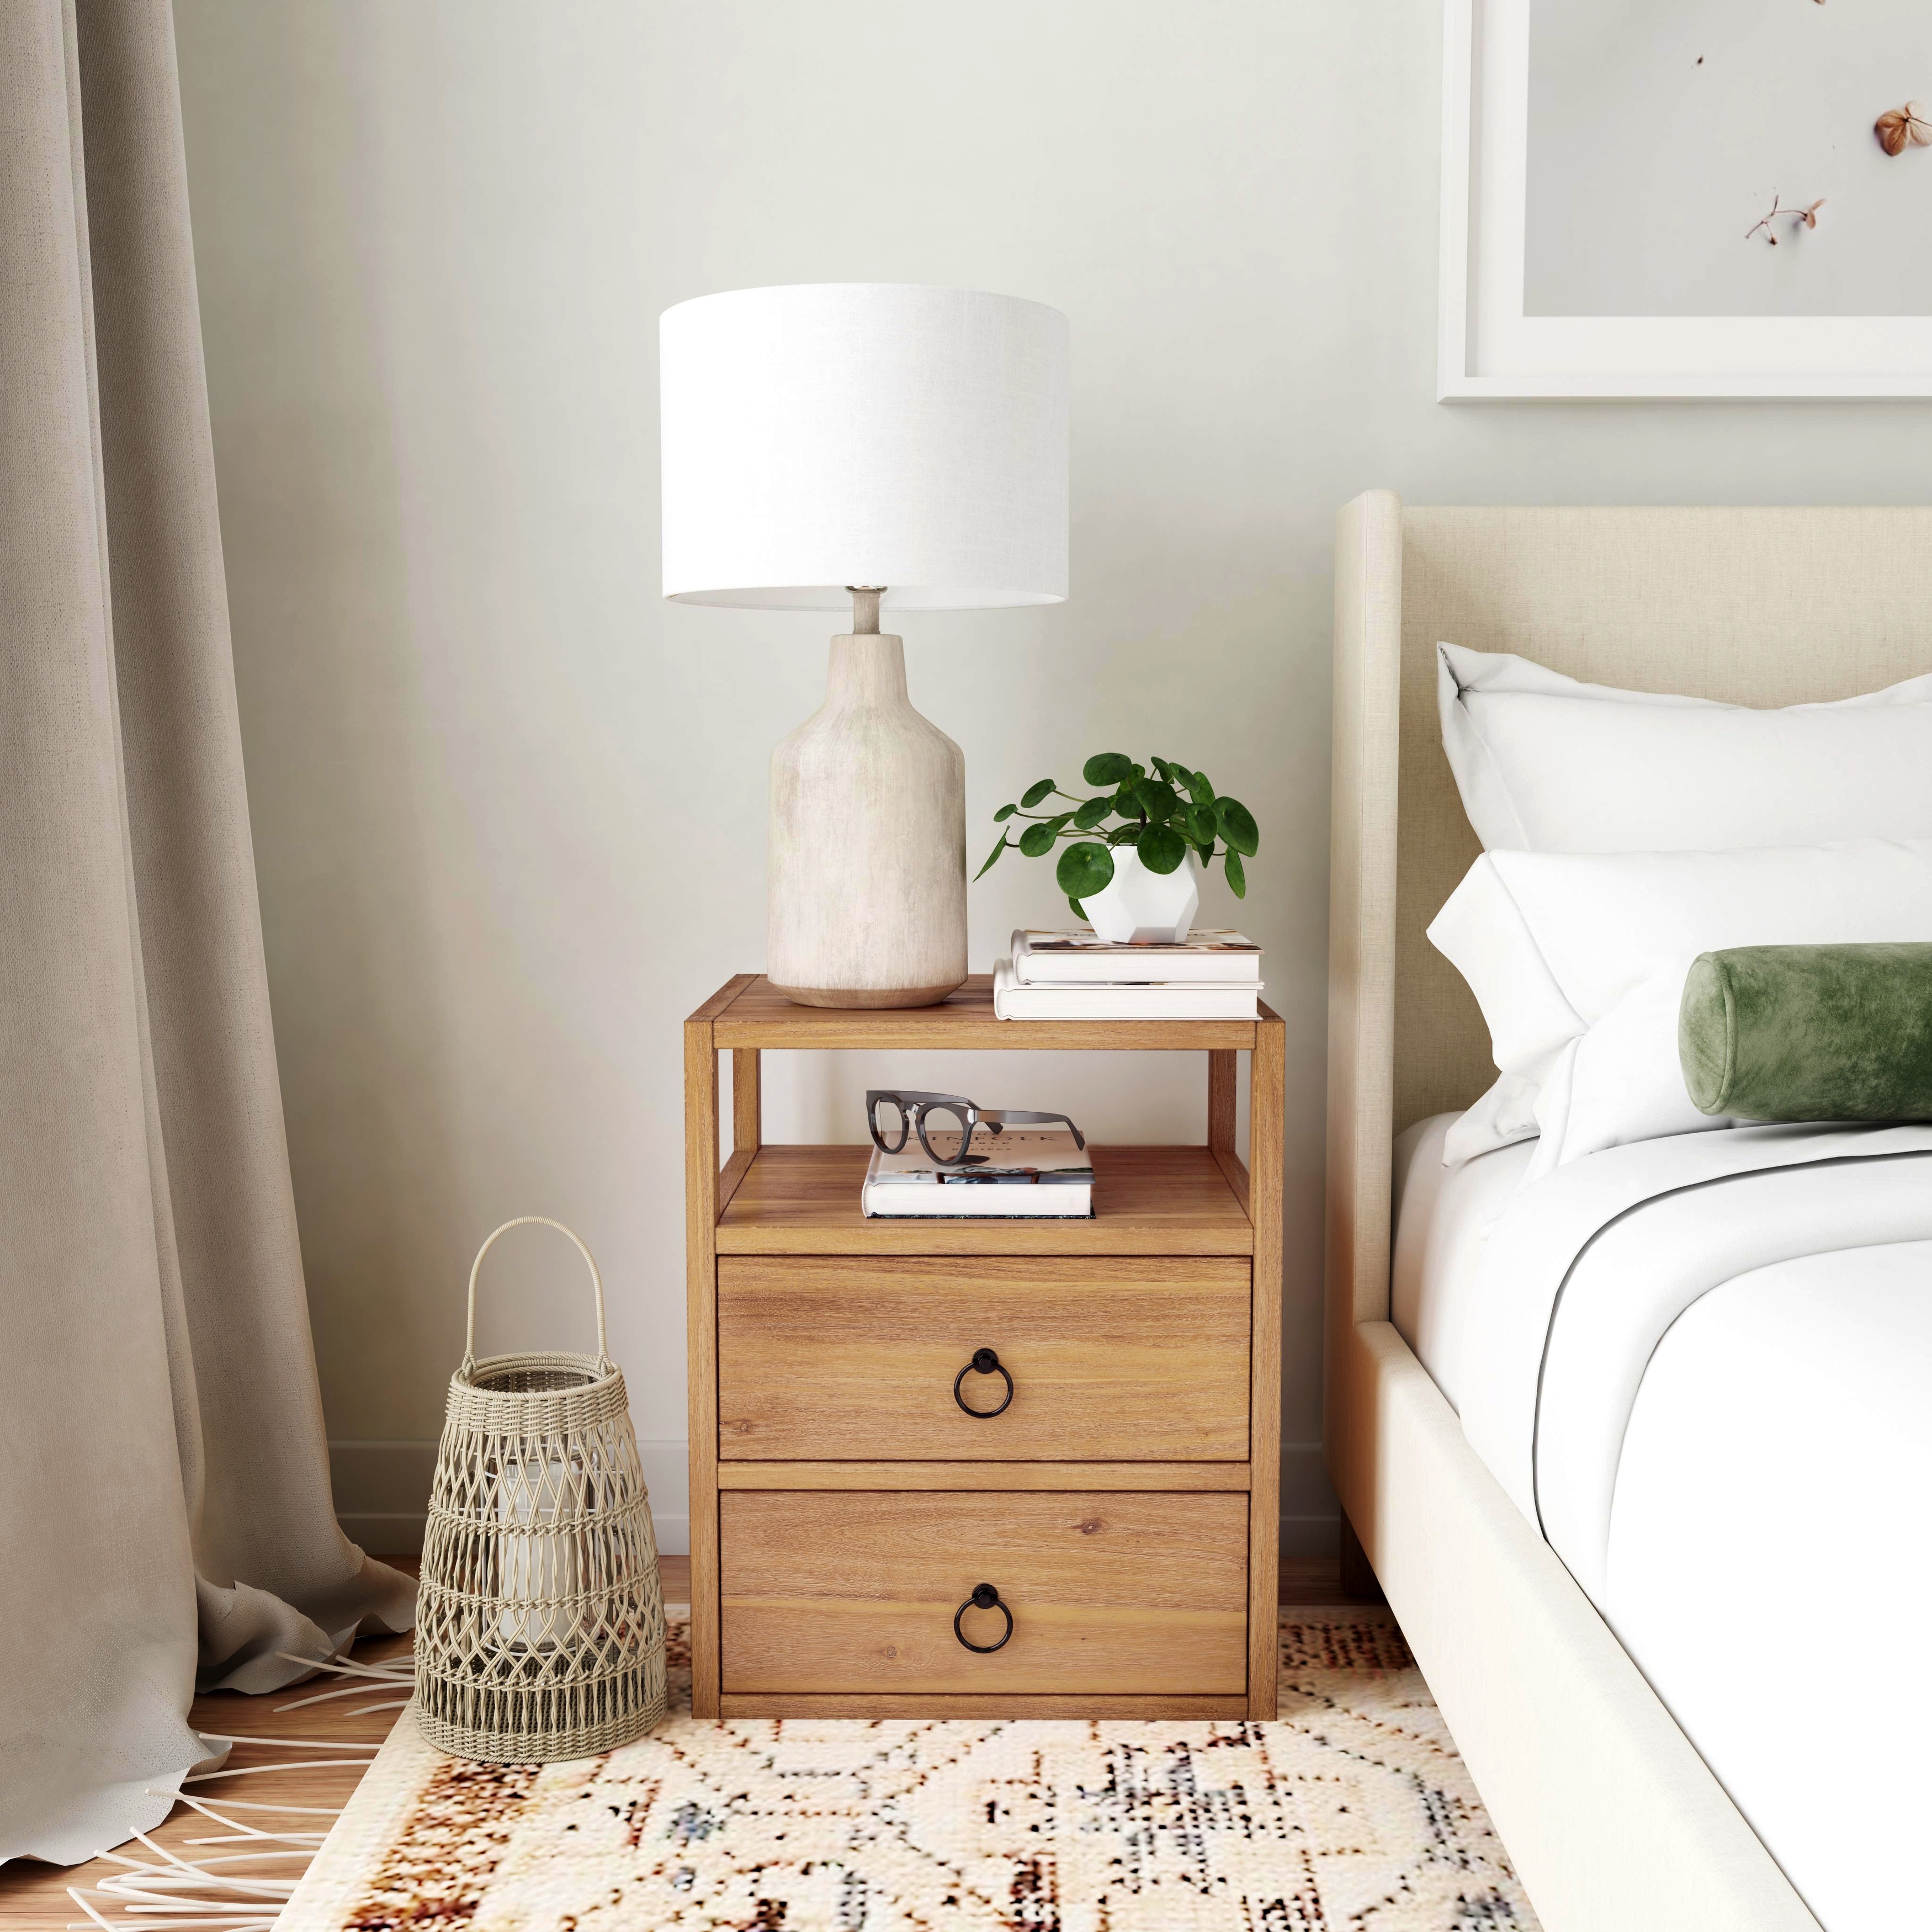 https://ak1.ostkcdn.com/images/products/is/images/direct/01a9195a65c965390e3a93883c9f686490d1f5c7/Butler-Lark-Nightstand.jpg